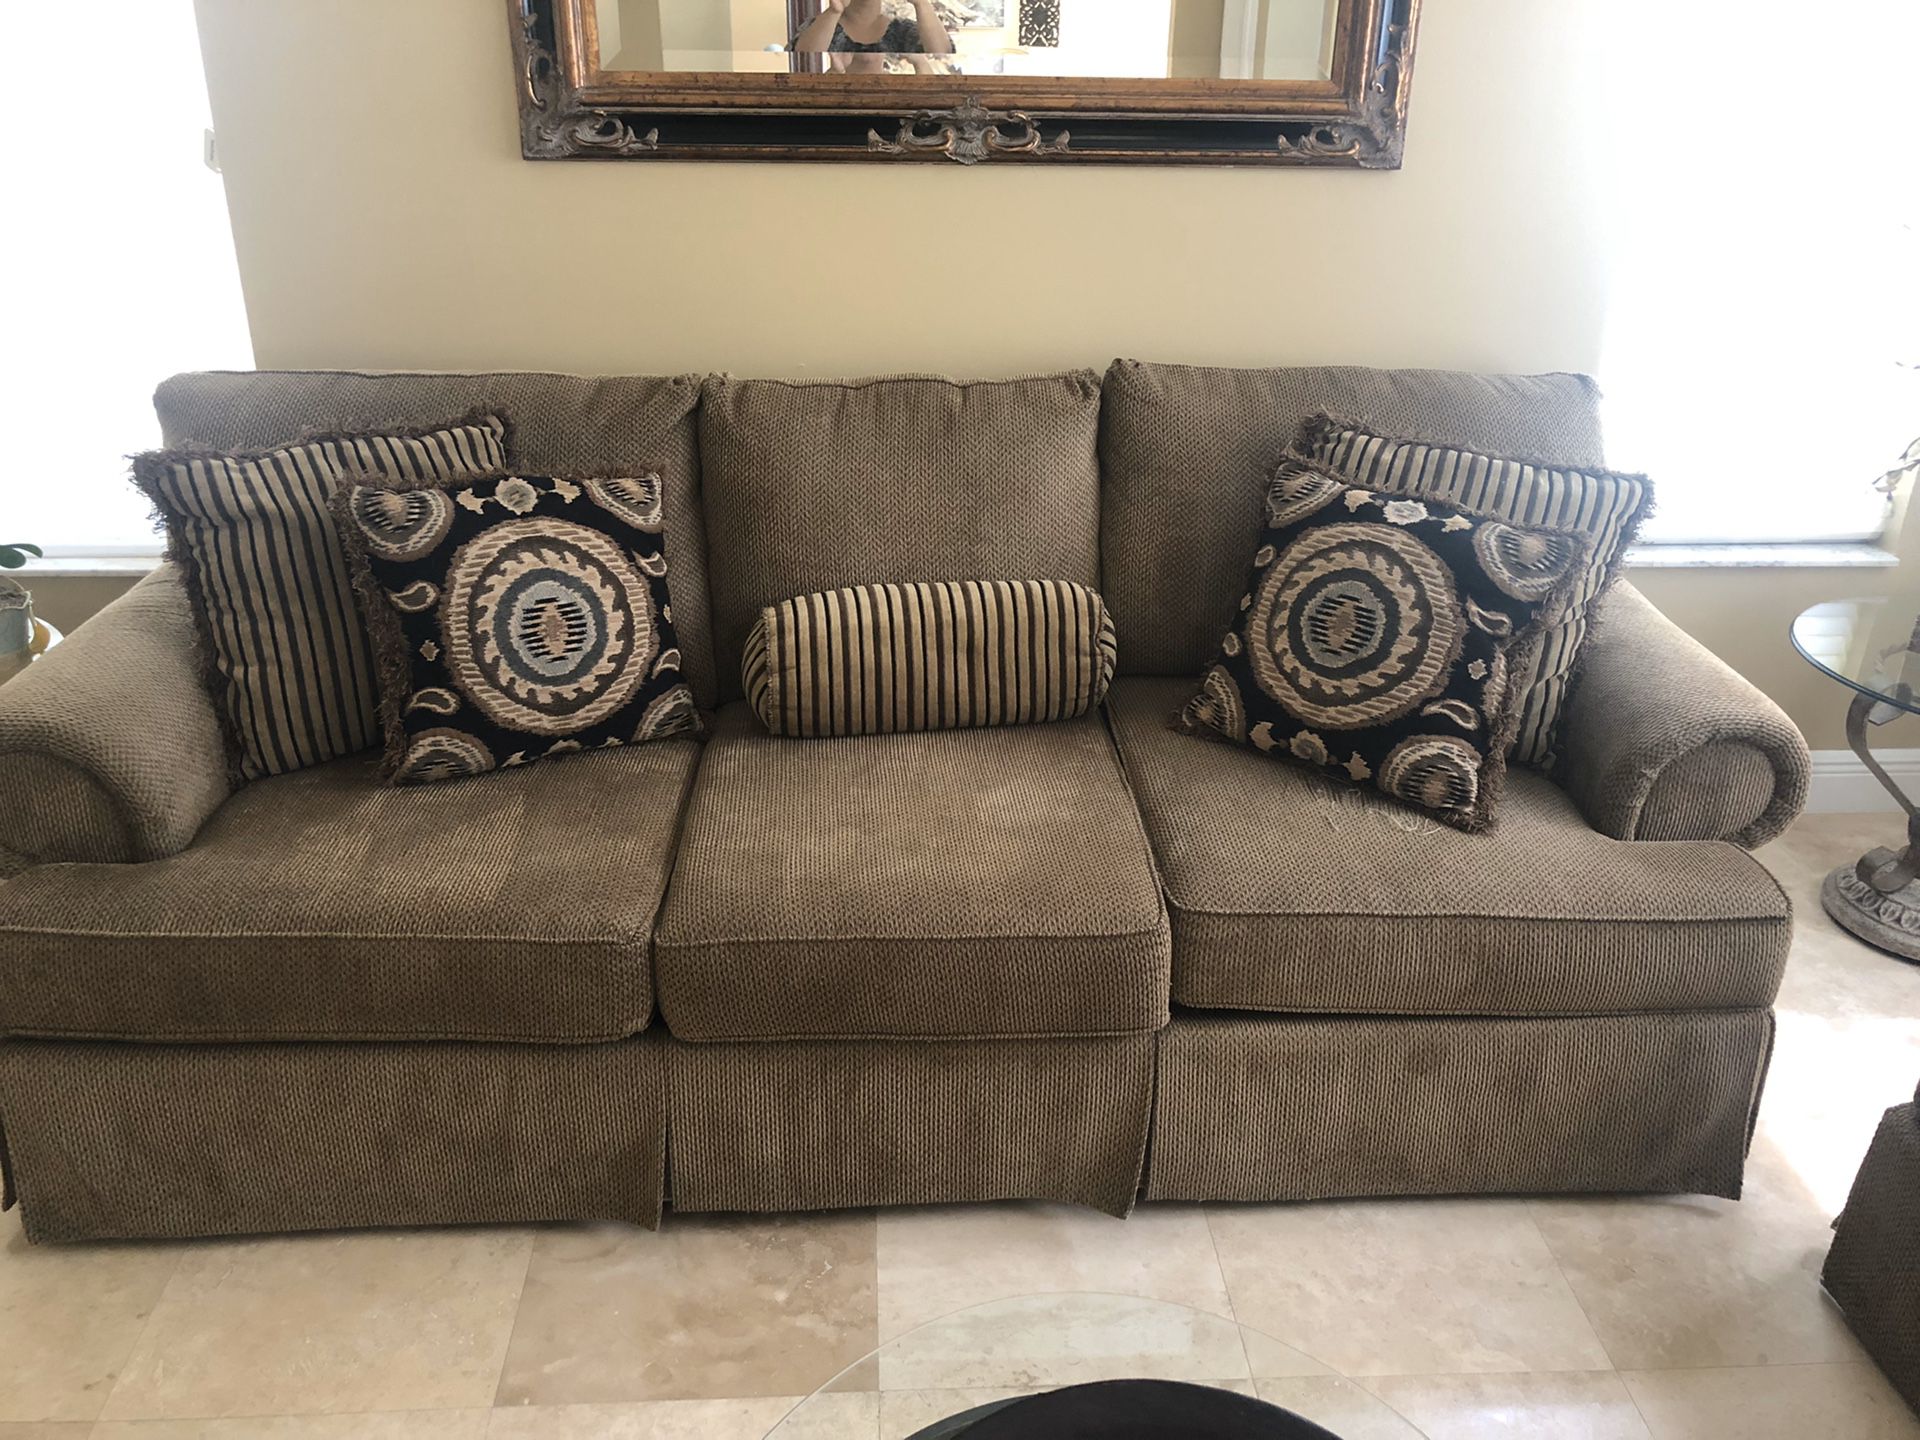 Free. Sofa and love seat. Little damage. Nice couch